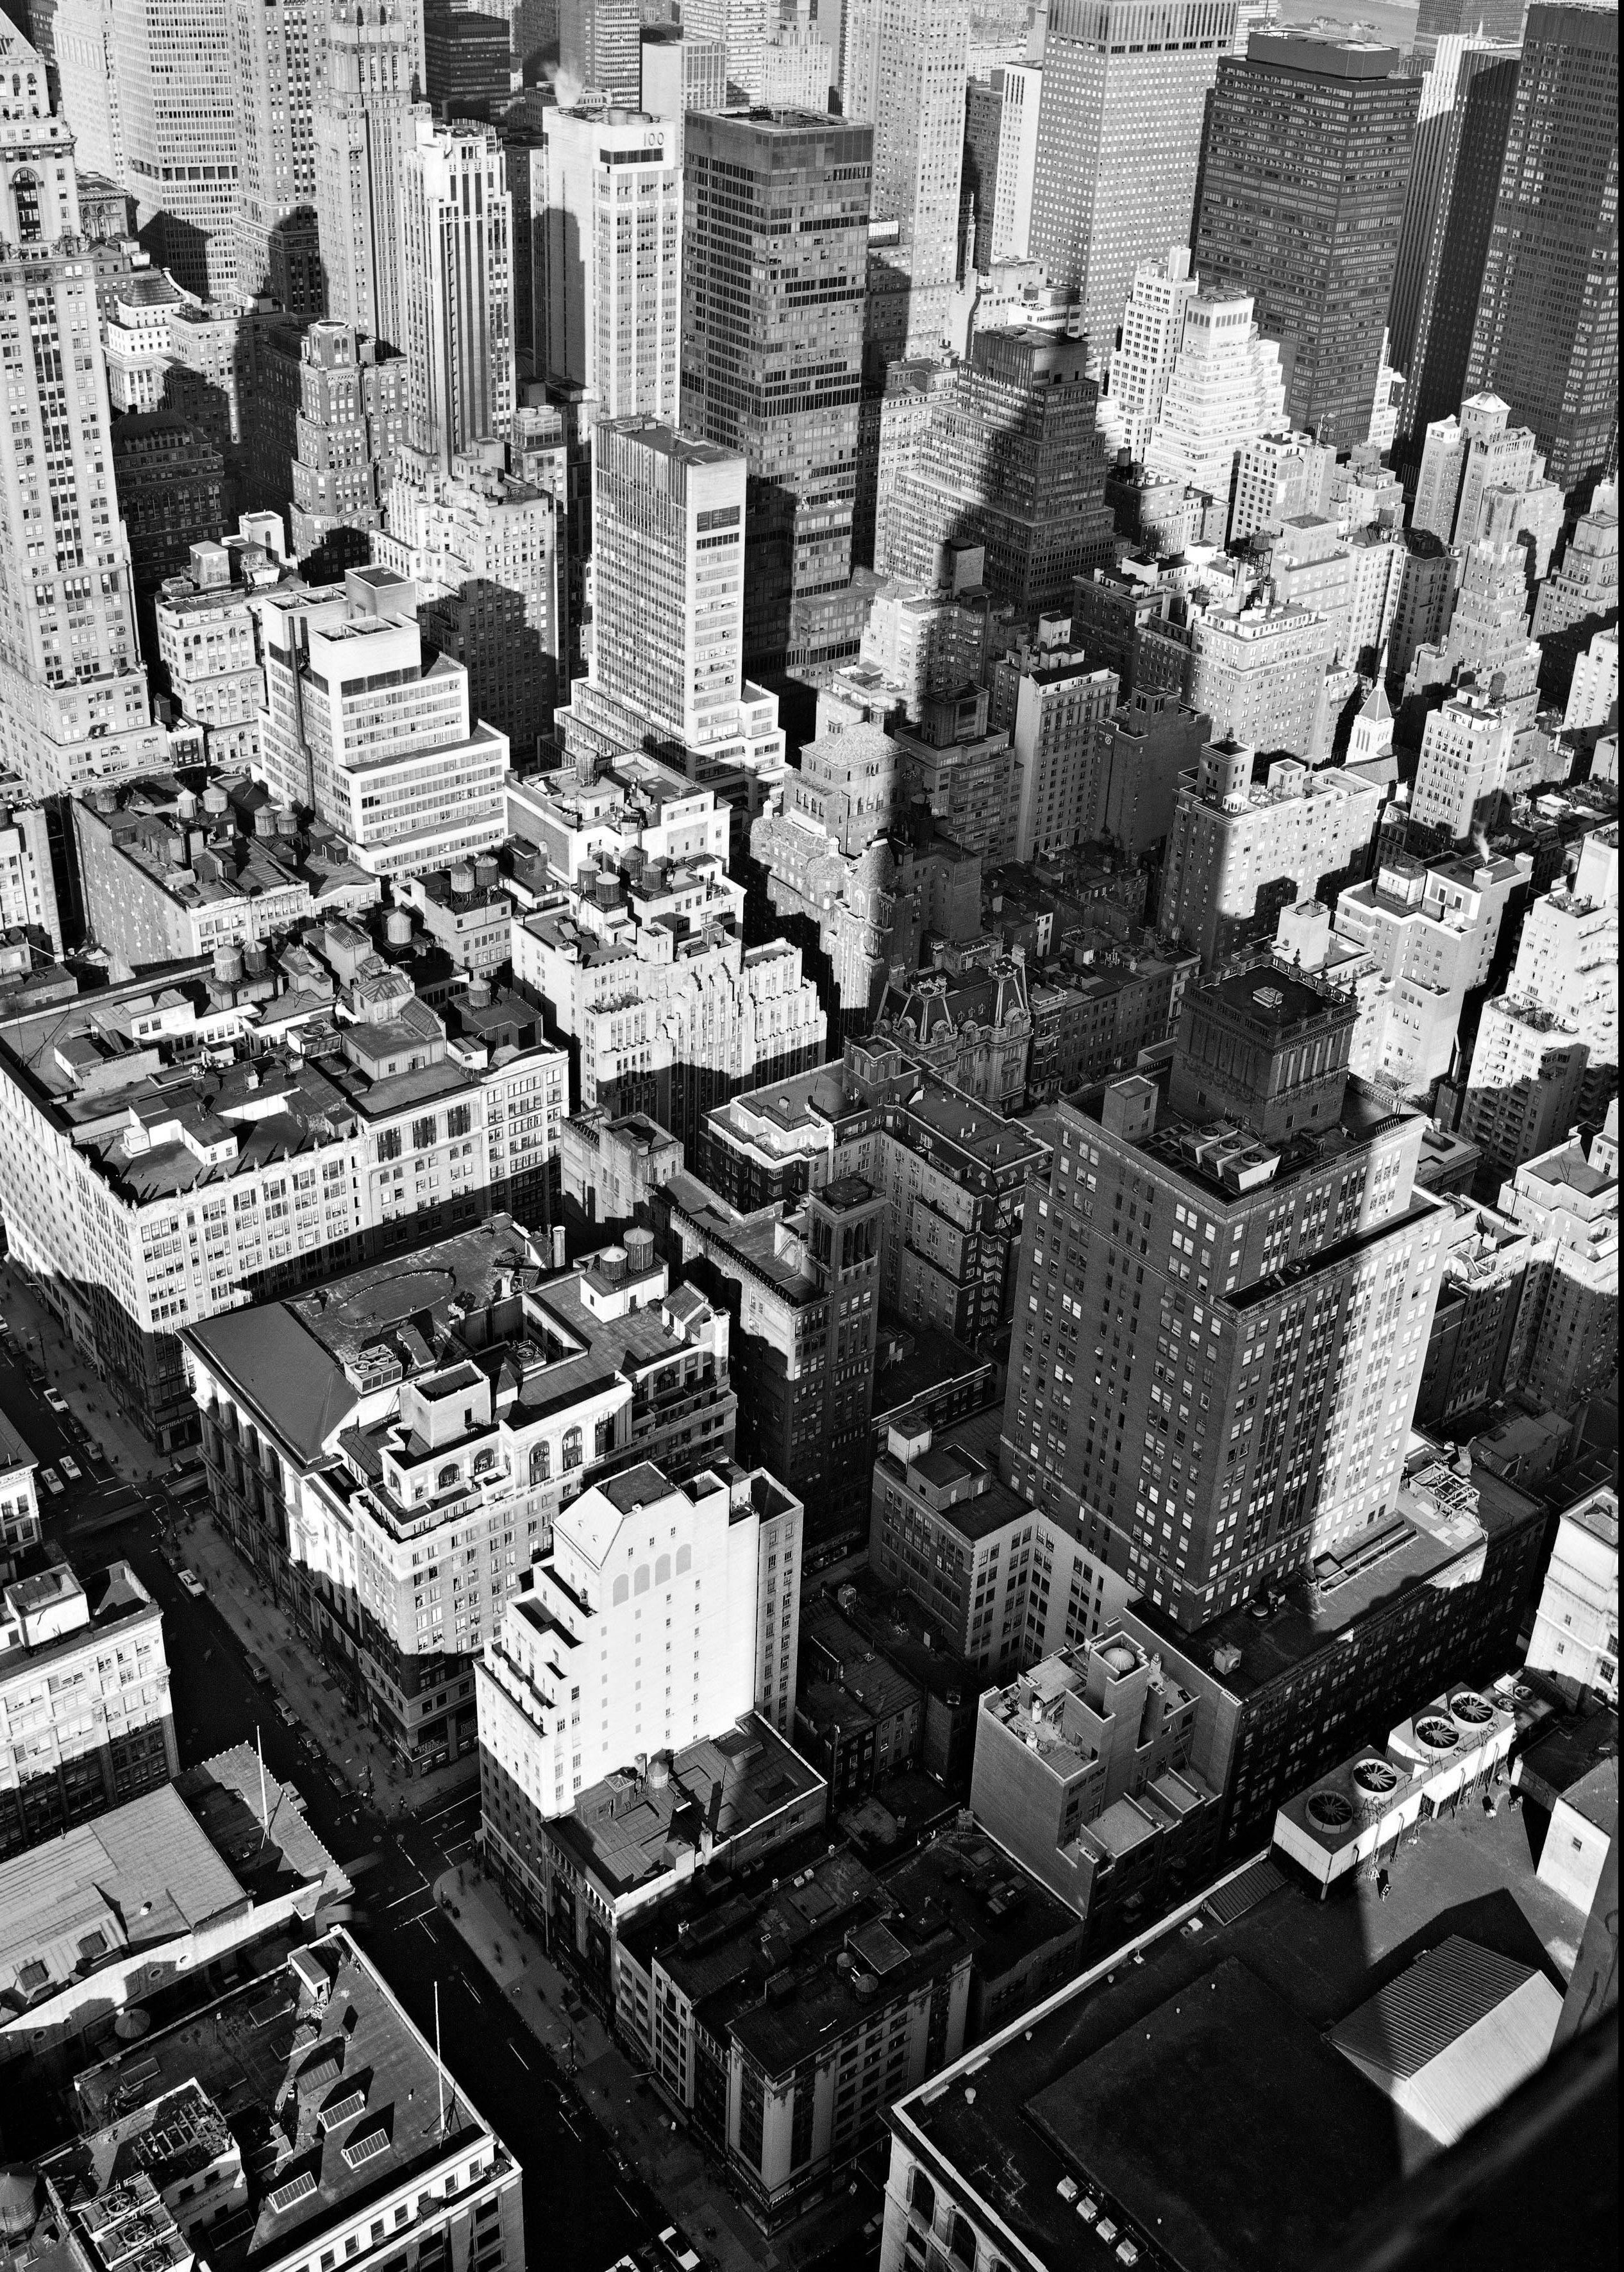 From the Empire State Building, 1978 (Philip Trager)